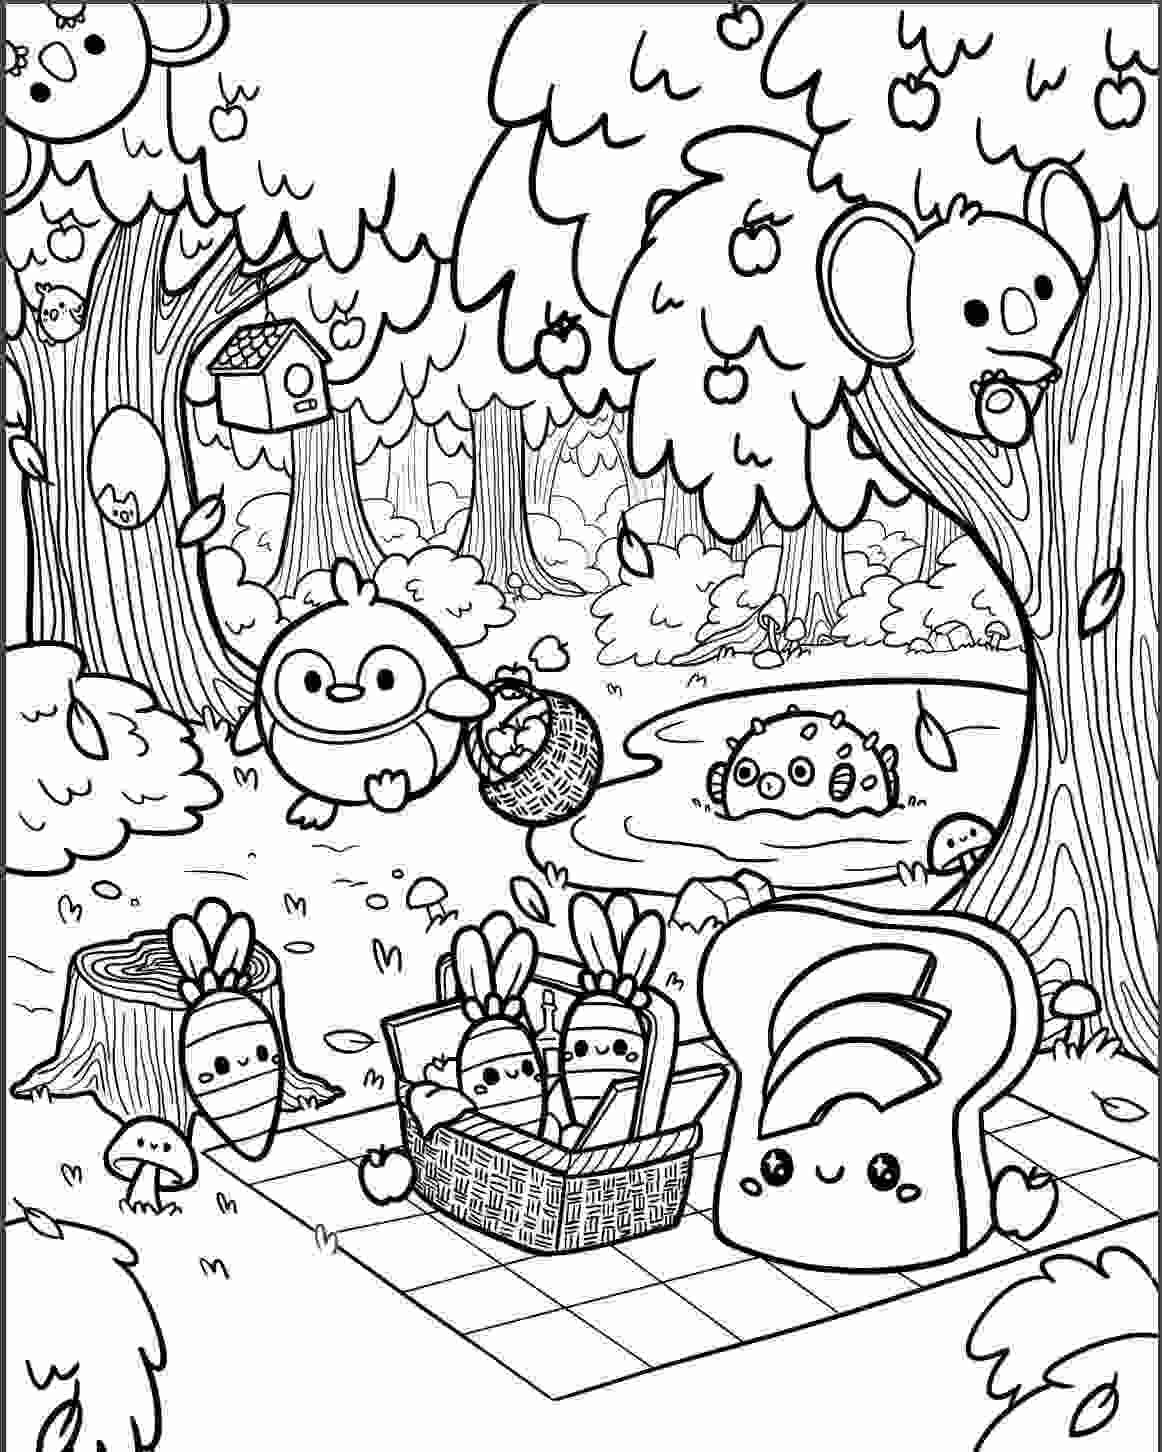 Squishmallow animals go camping in the forest Coloring Pages ...